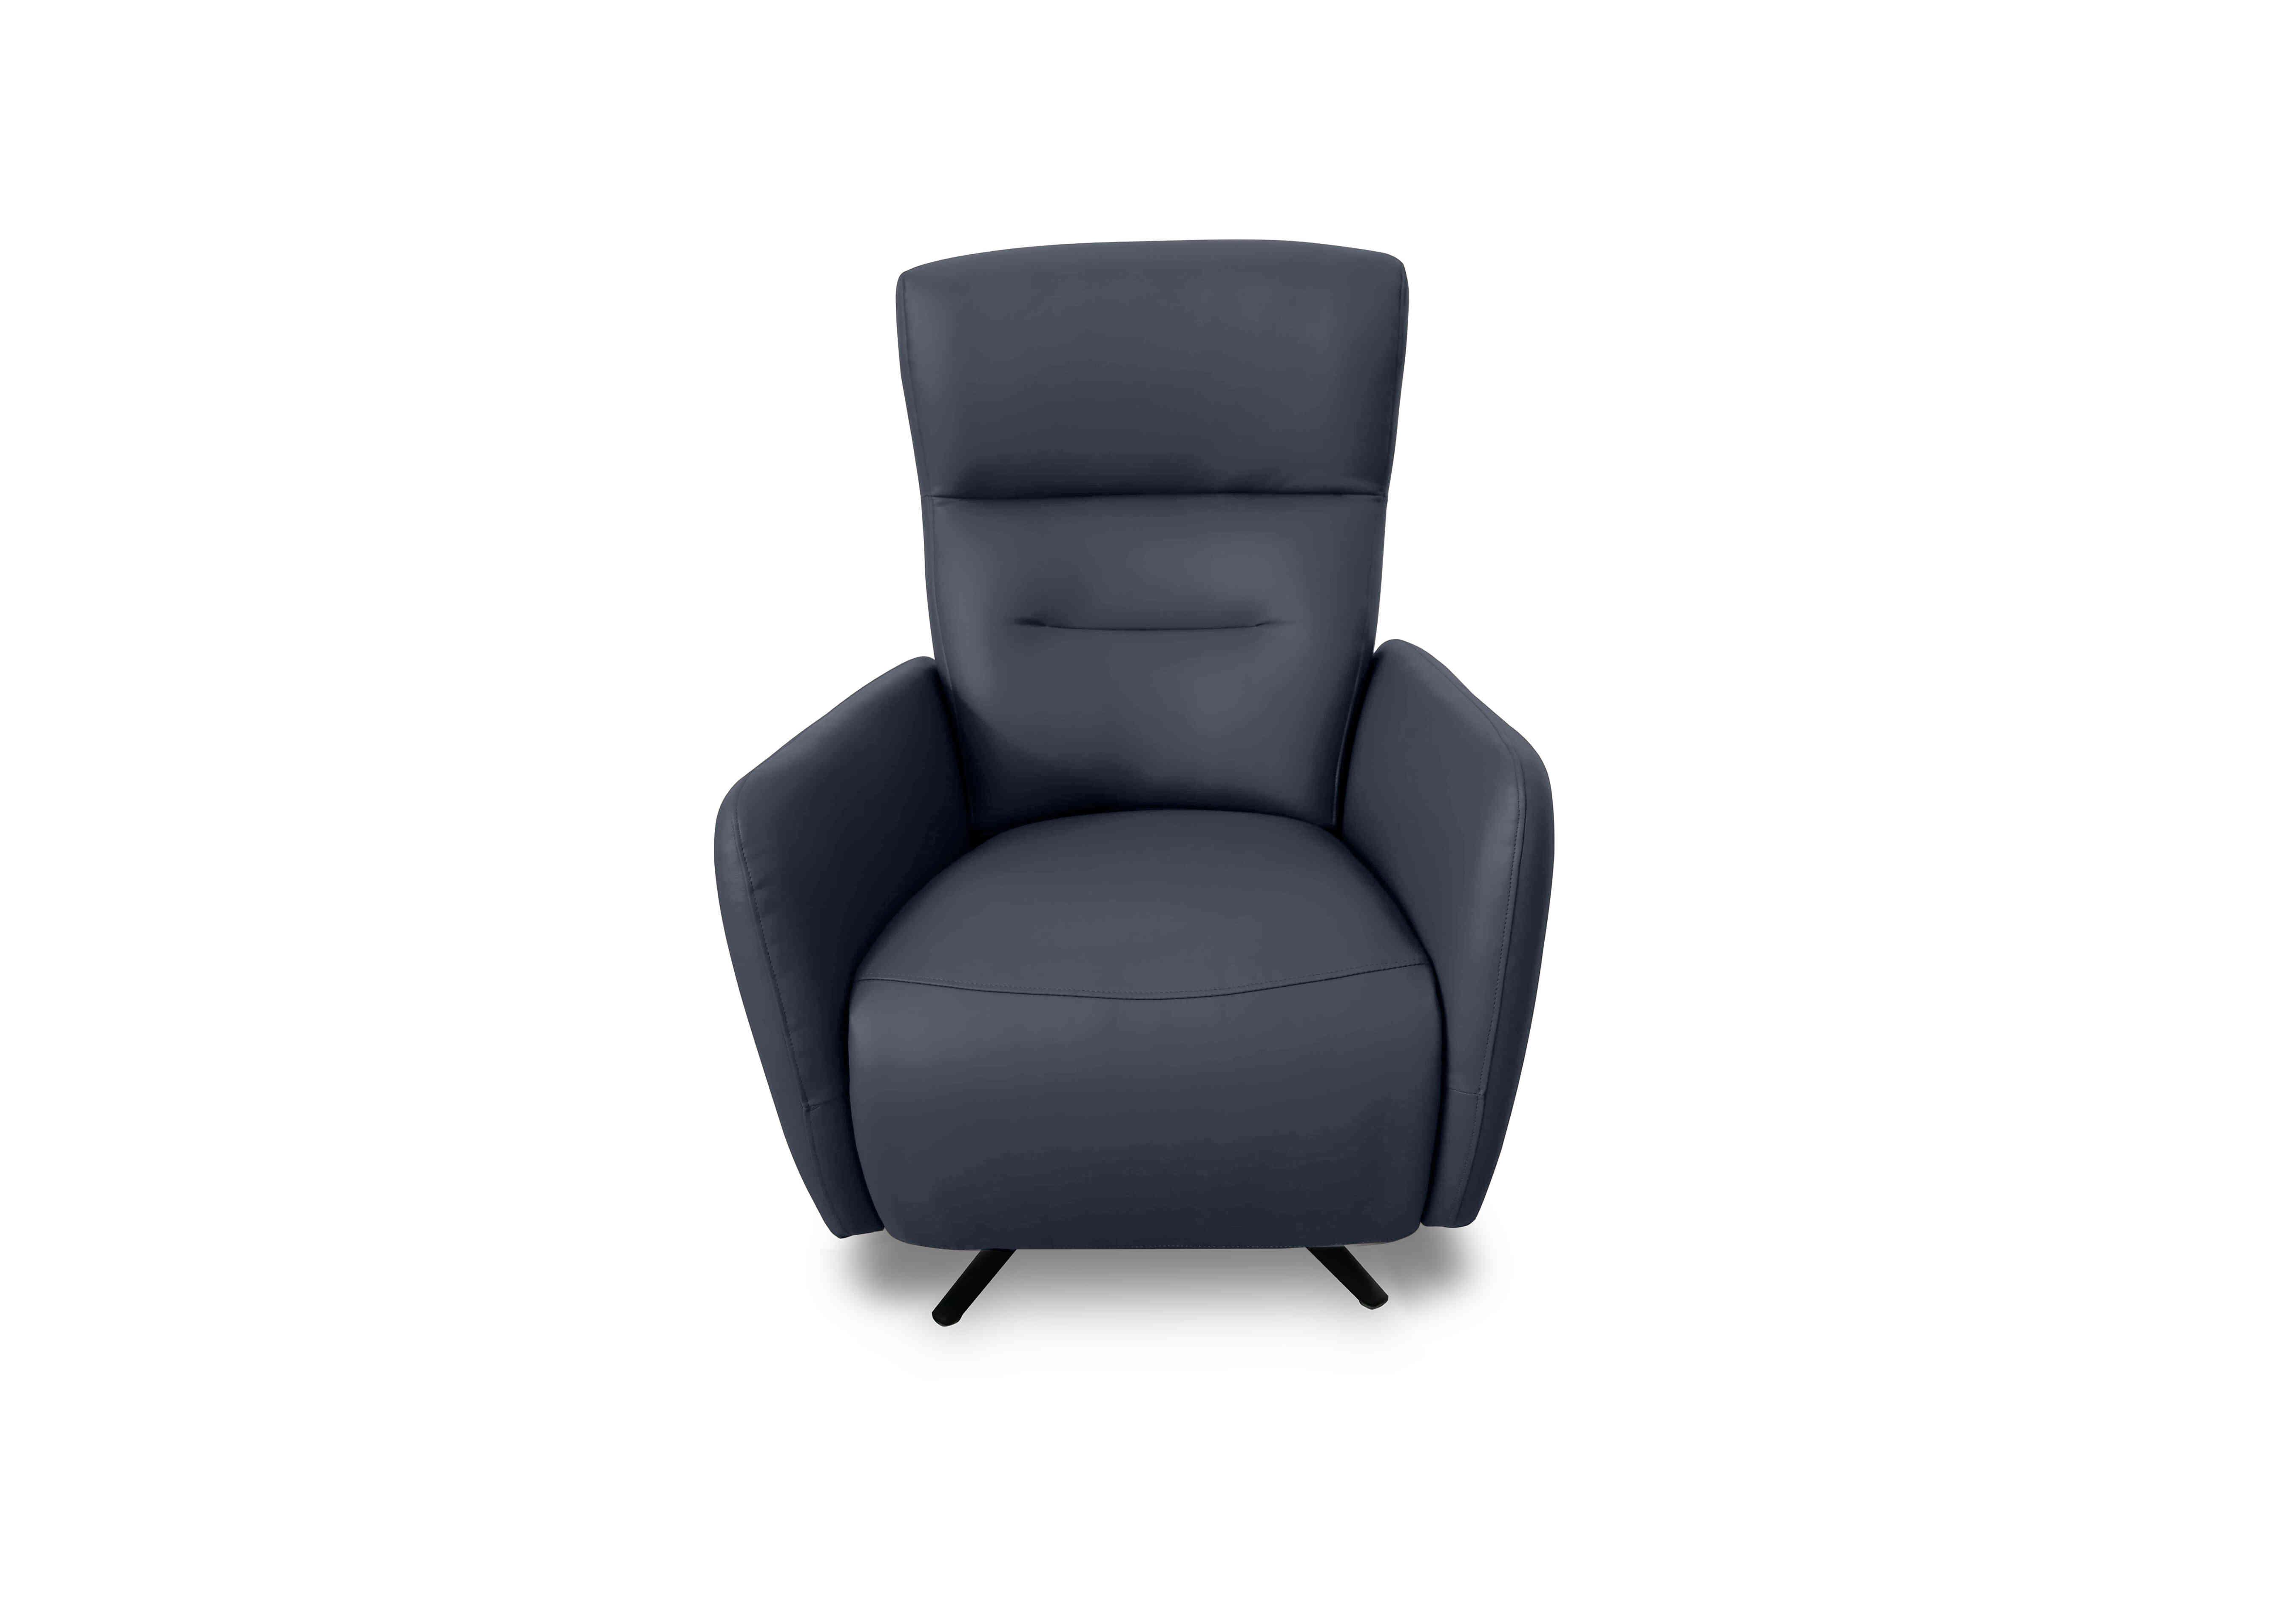 Designer Chair Collection Le Mans Leather Dual Power Recliner Swivel Chair in Nc-313e Ocean Blue on Furniture Village